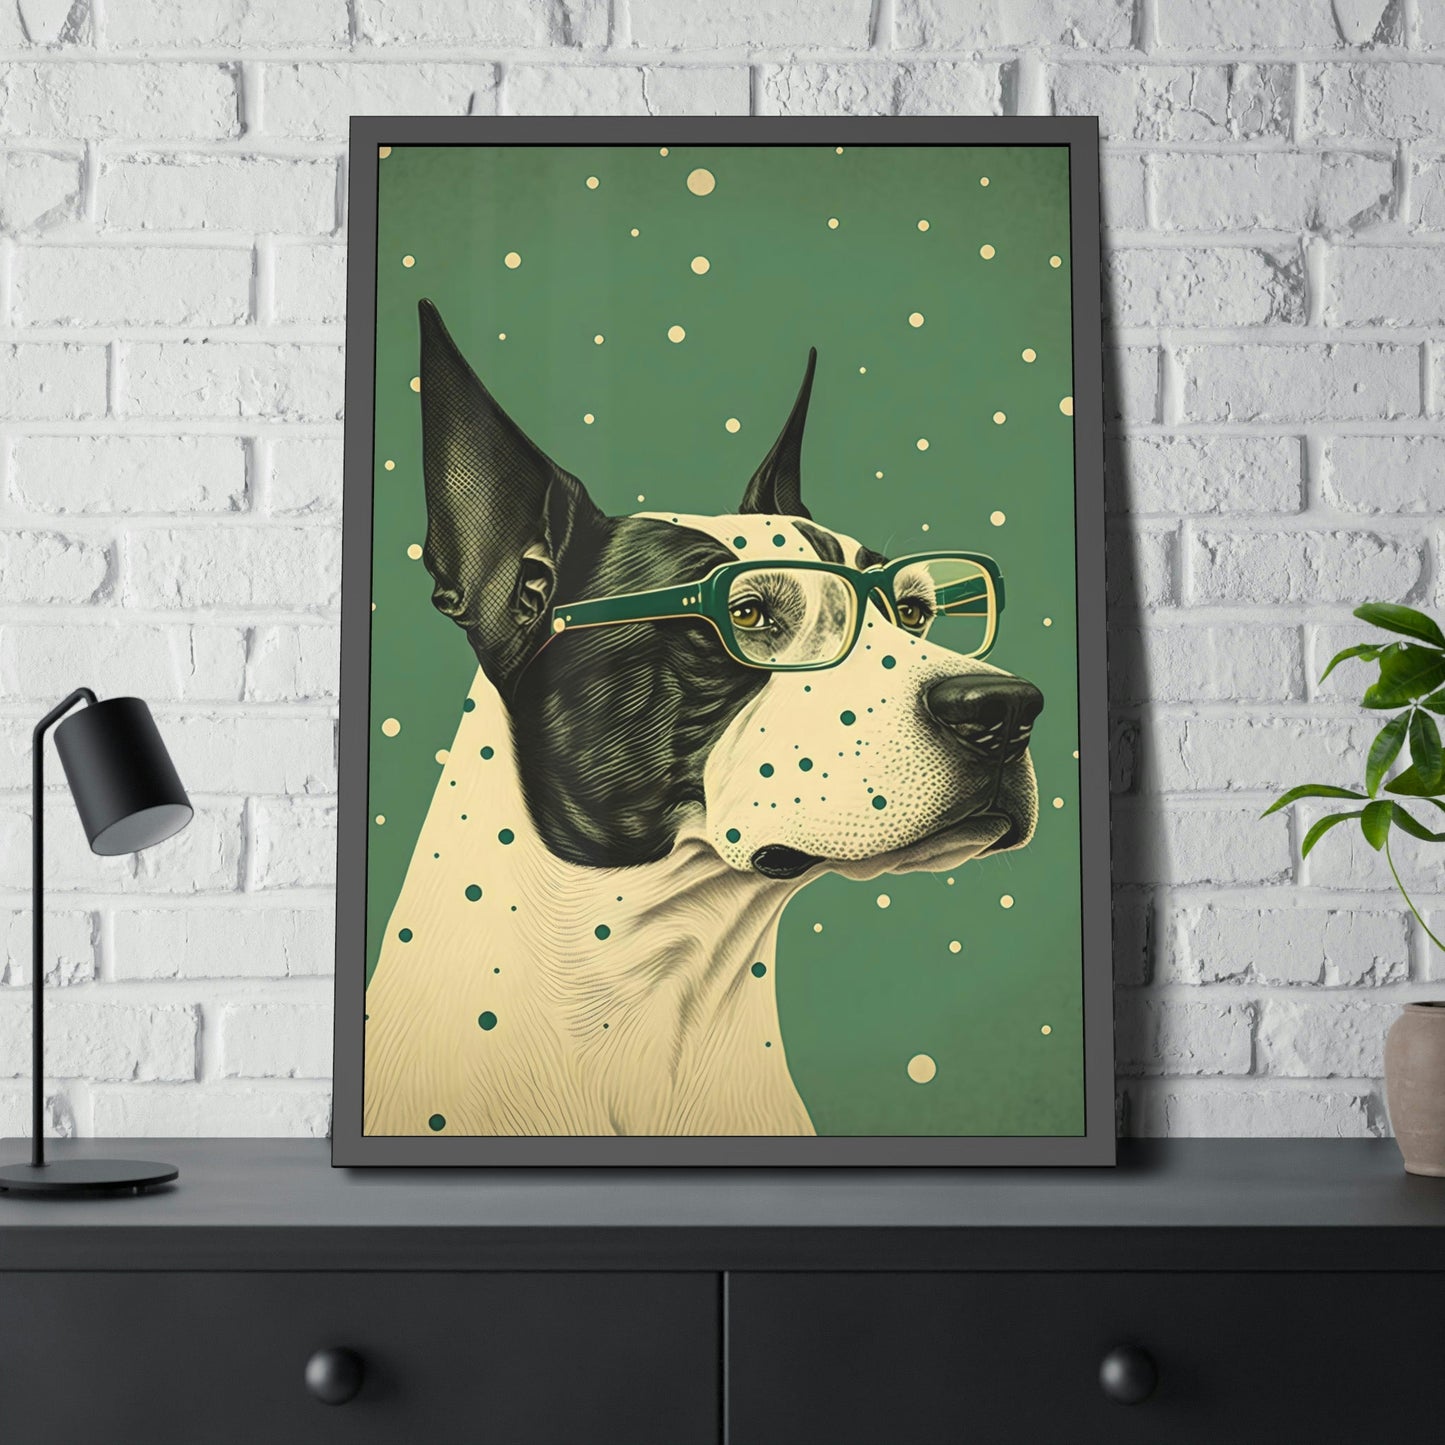 Pawsitively Adorable: Wall Art of a Cute Dog on Natural Canvas